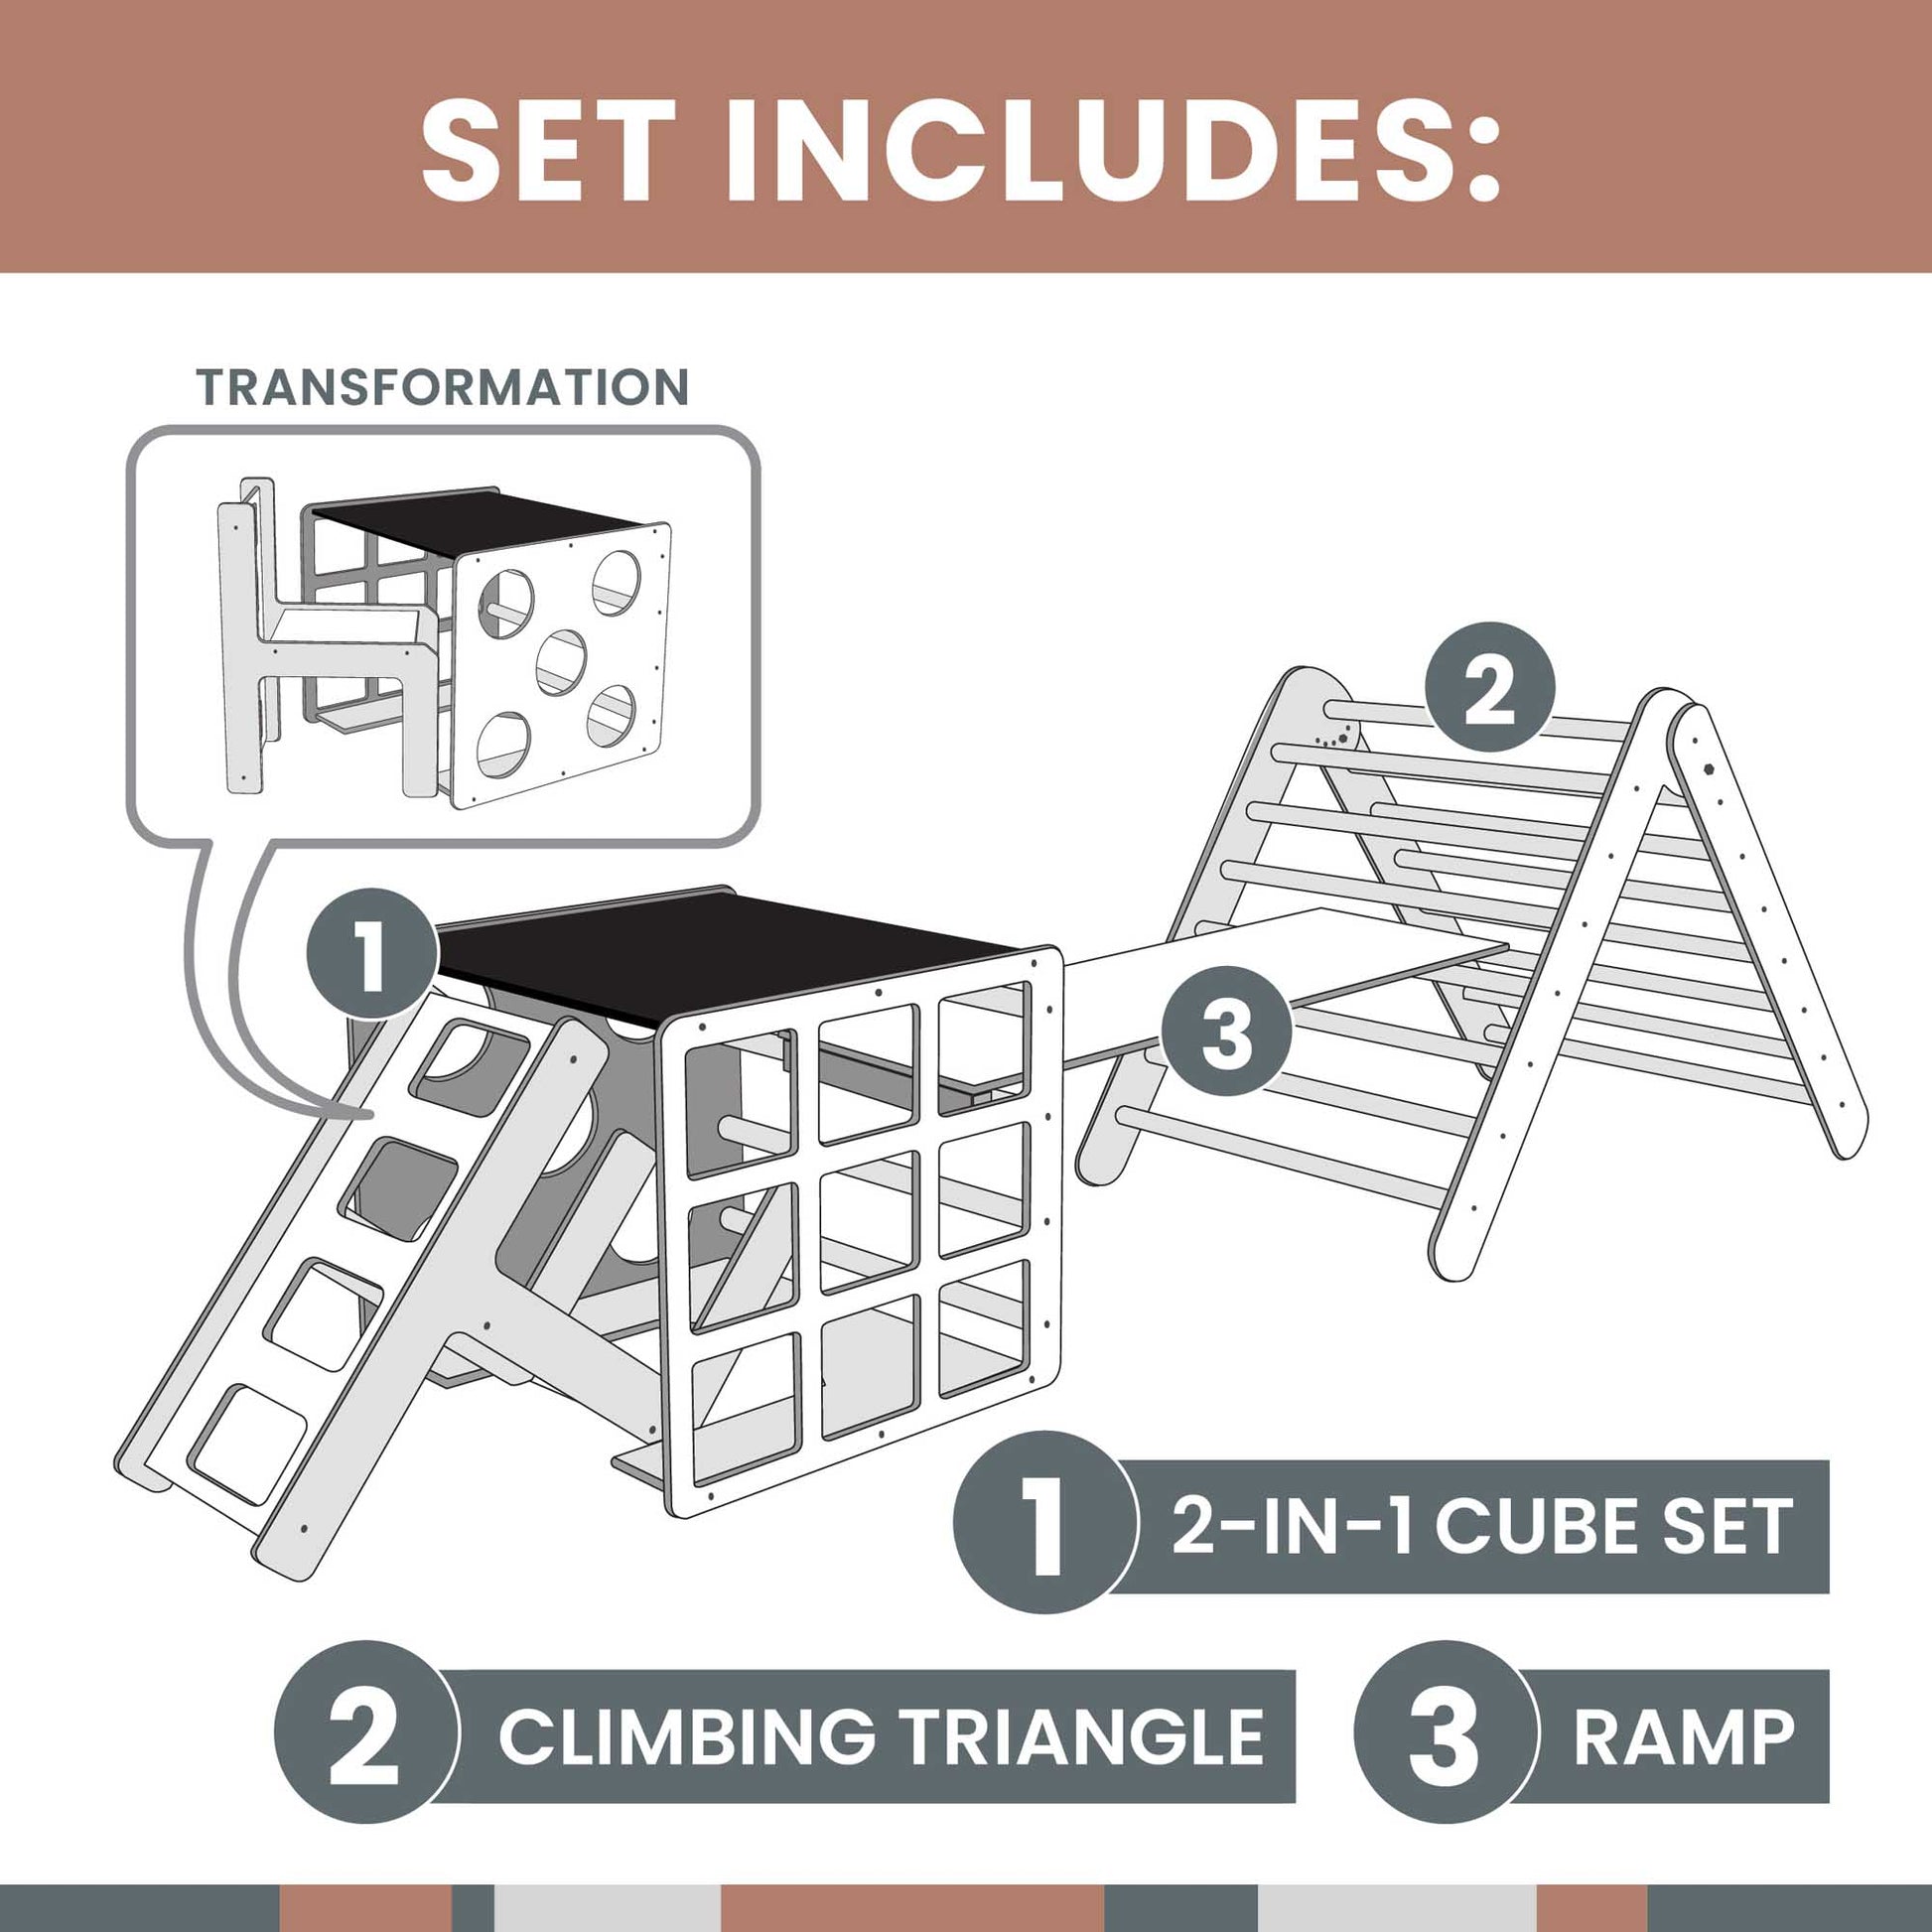 A comprehensive guide on assembling a Foldable climbing triangle + 2-in-1 cube / table and chair + a ramp set, including a climbing gym and activity cube.